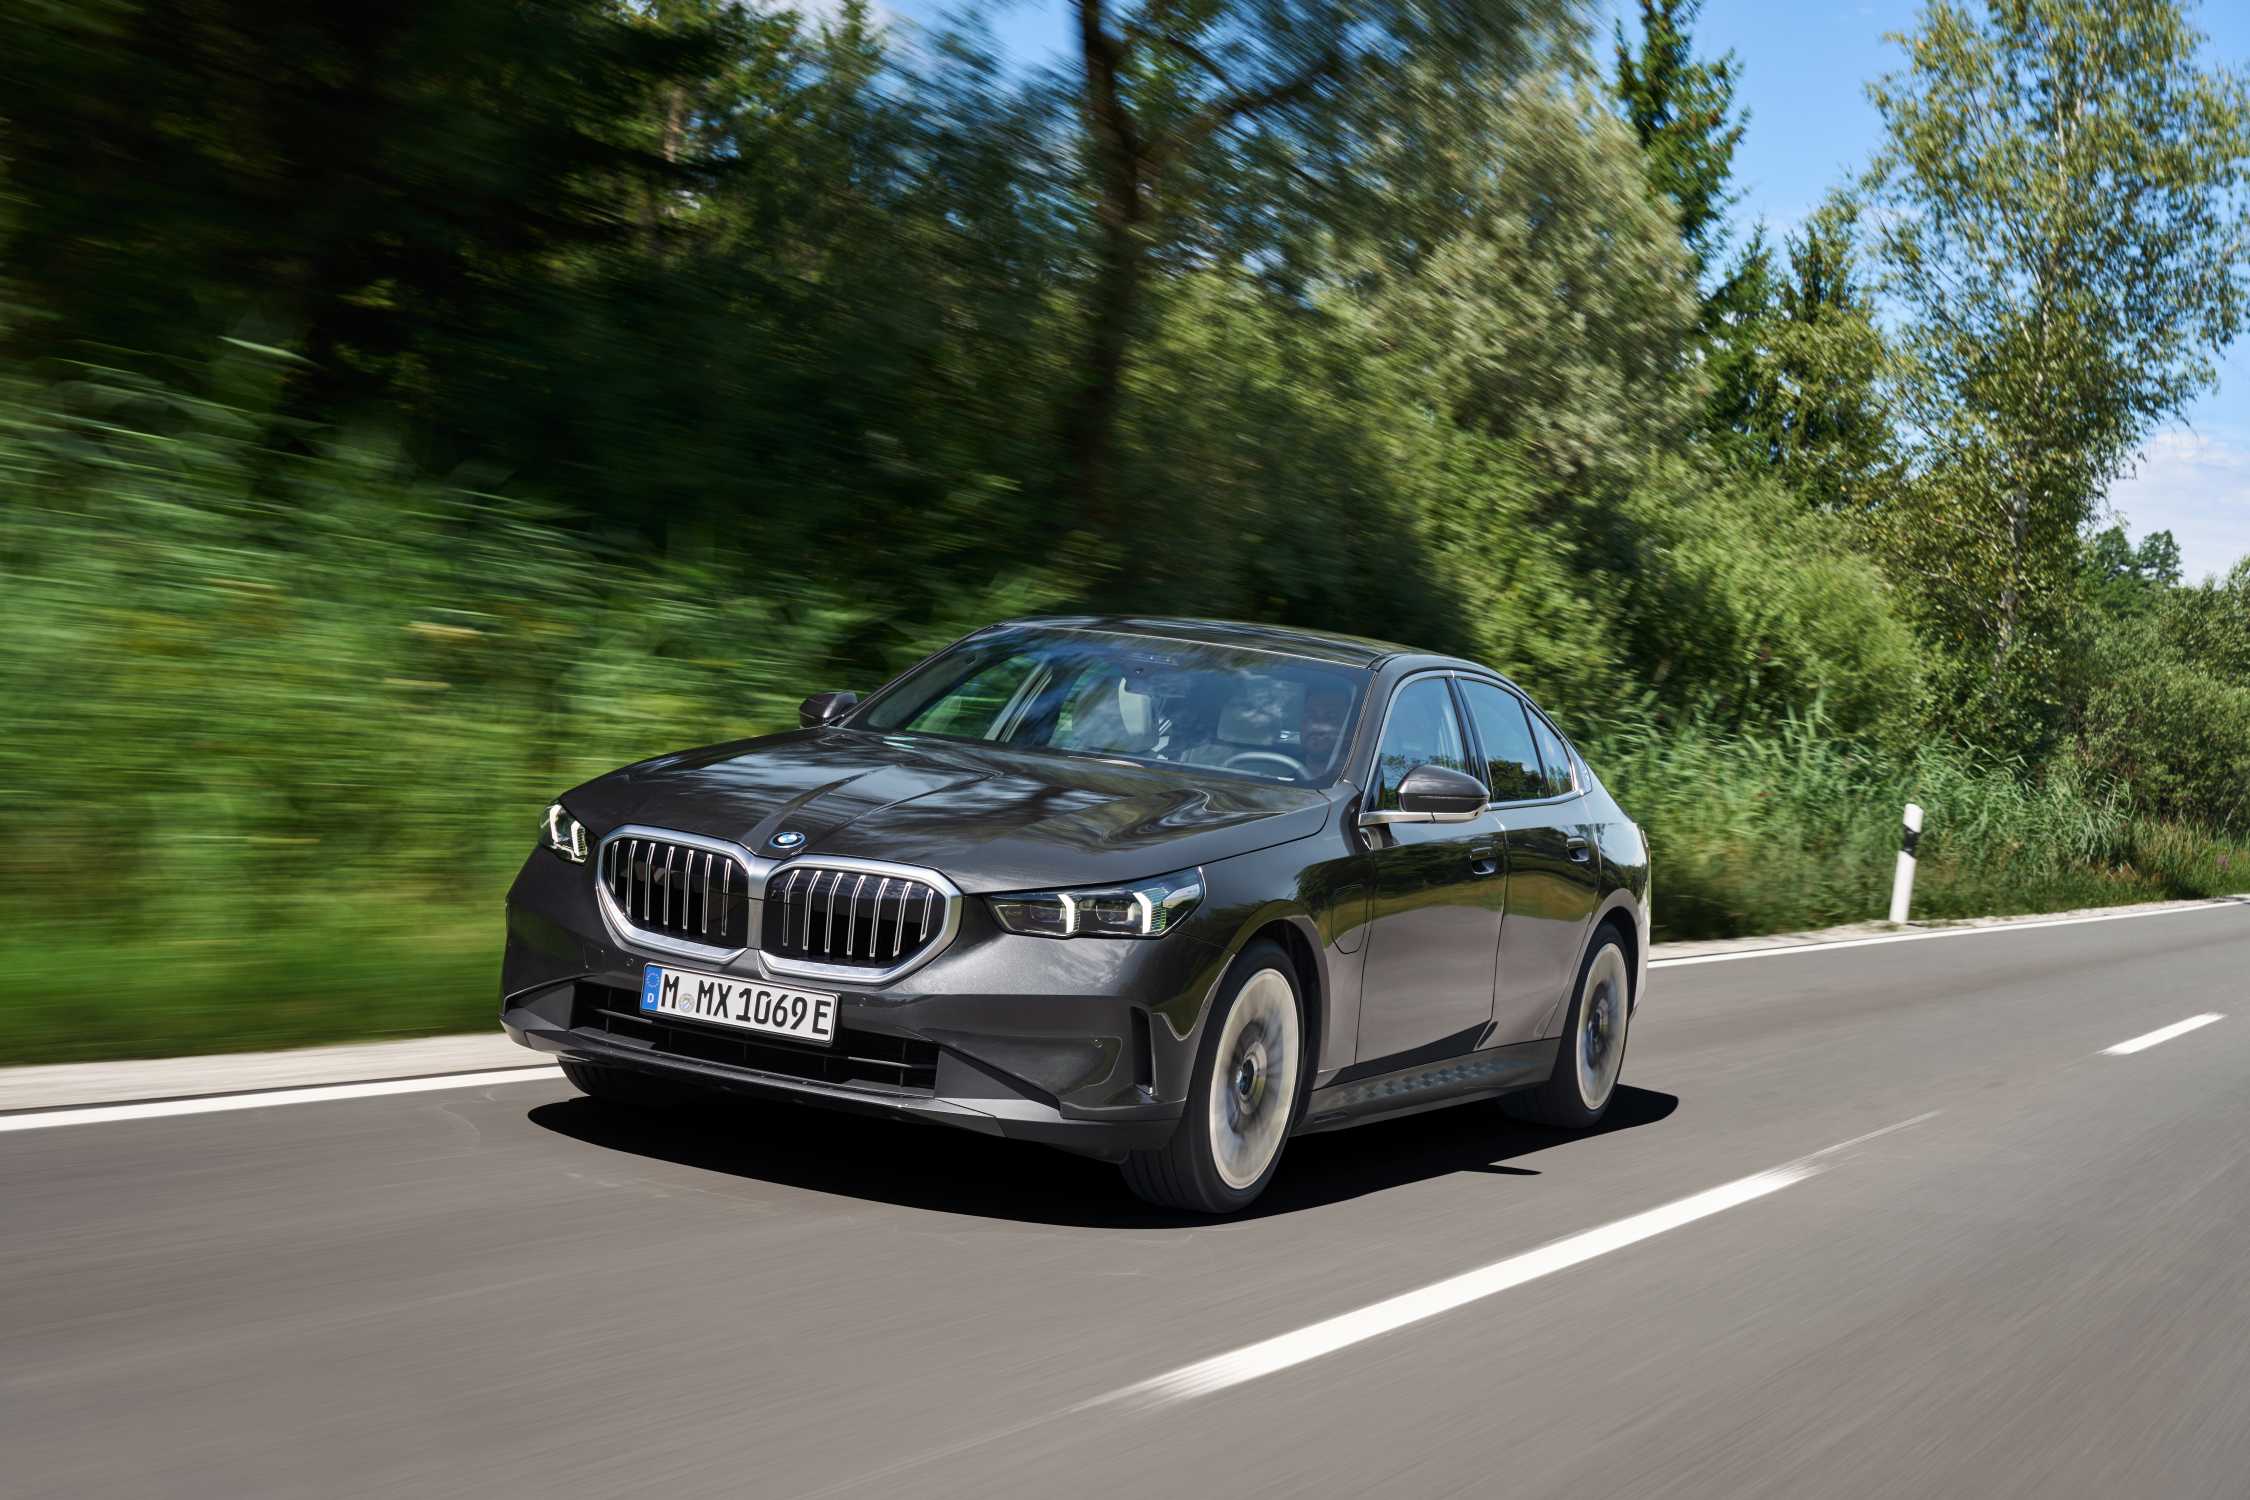 Electrification completed: New BMW 5 Series Sedan now also available with plug-in hybrid drive.